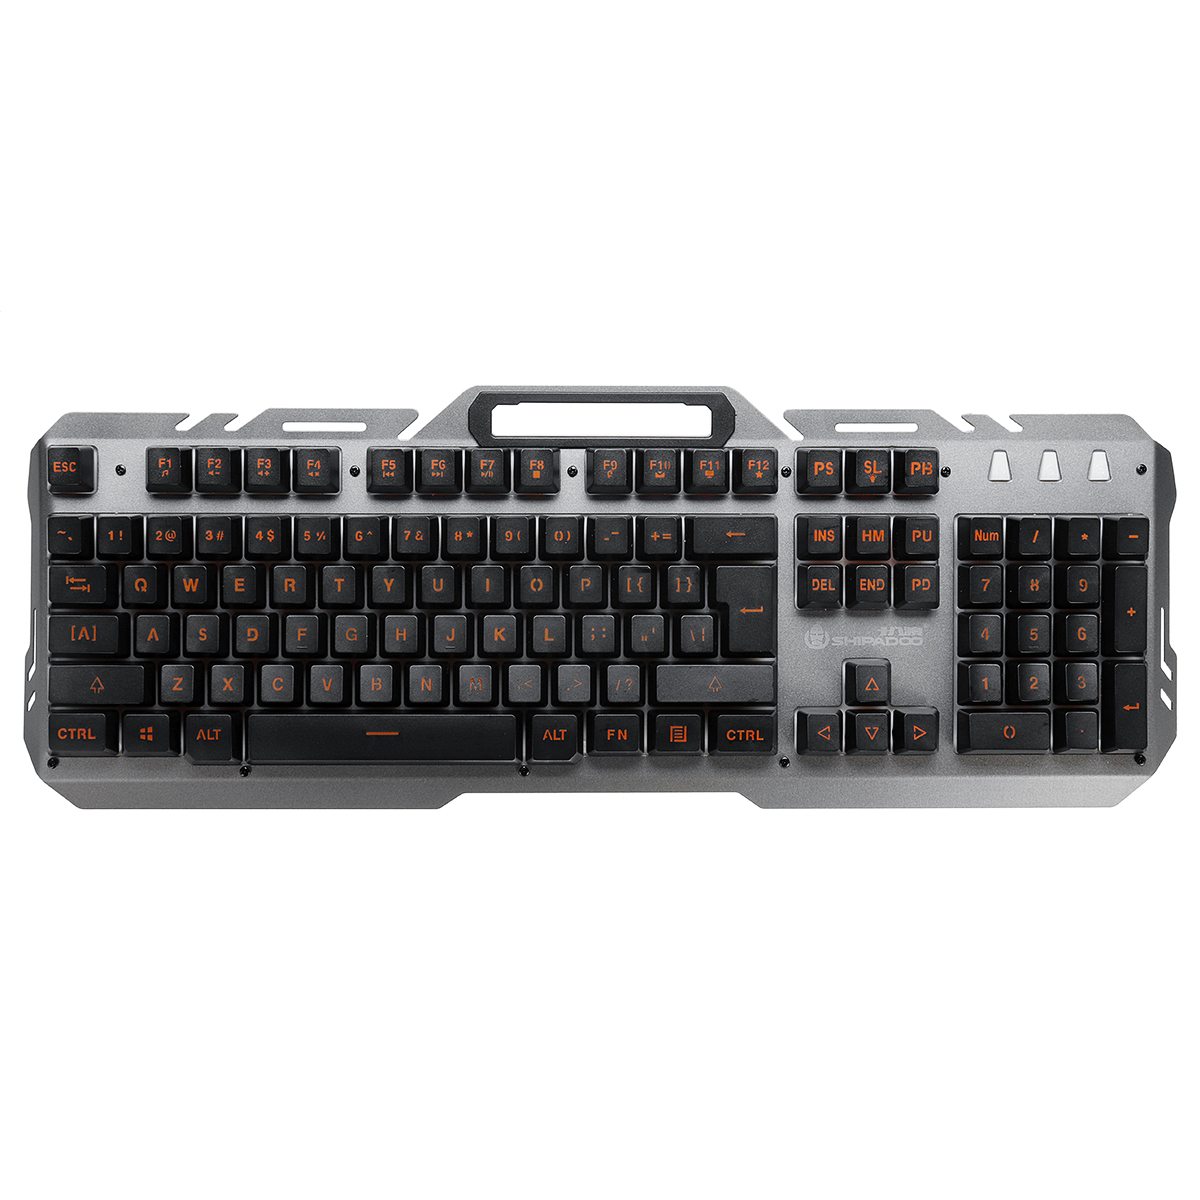 Shipadoo 104 Keys USB Wired Dual-Color Injection Molding Translucent Keycap Backlit Mechanical Handfeel Gaming Keyboard with Phone Support 2